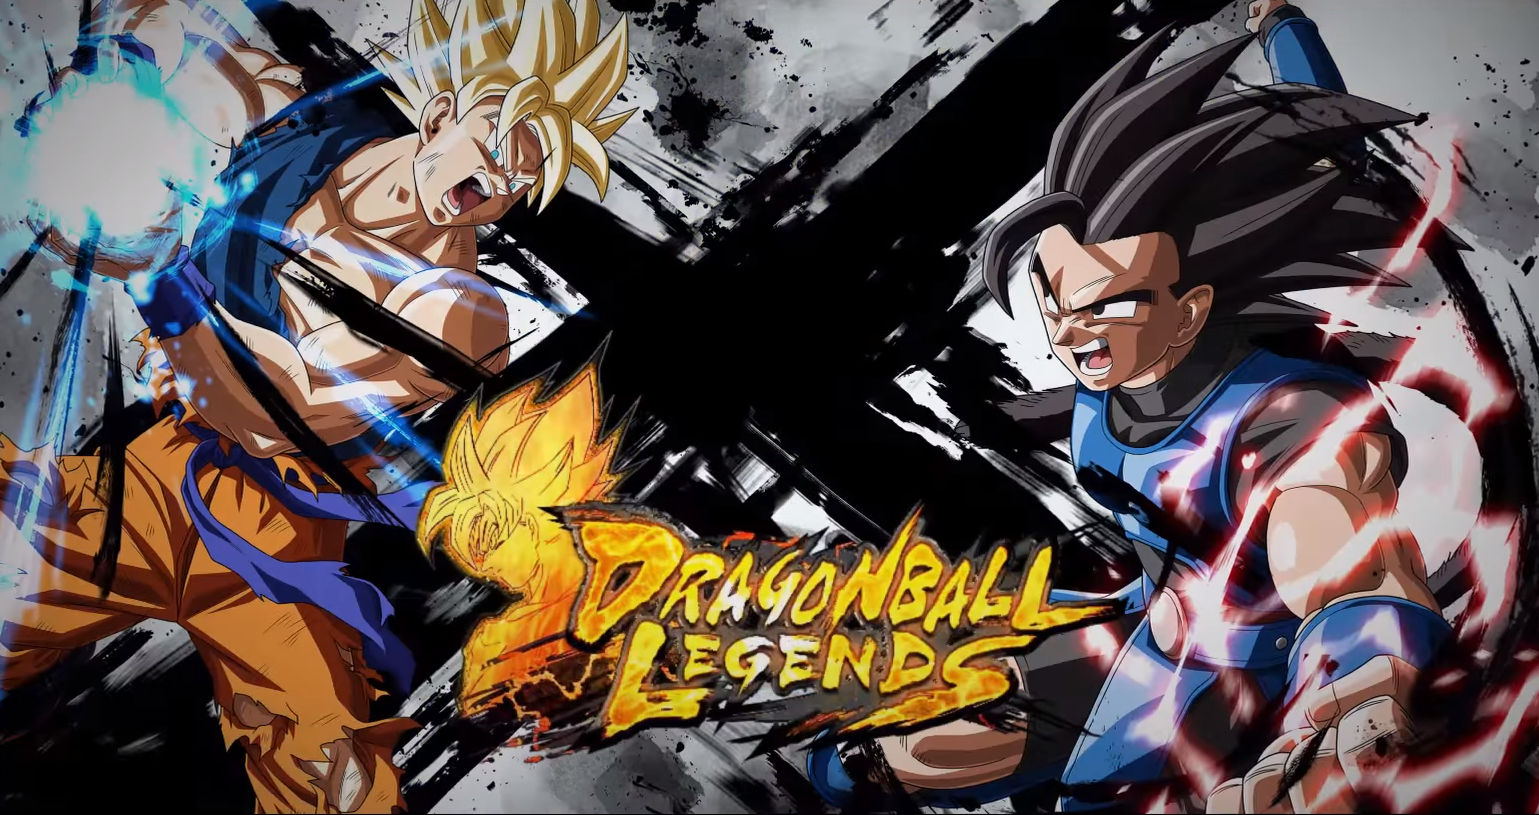 Bandai Namco's newest mobile fighting game 'Dragon Ball Legends' is available for pre